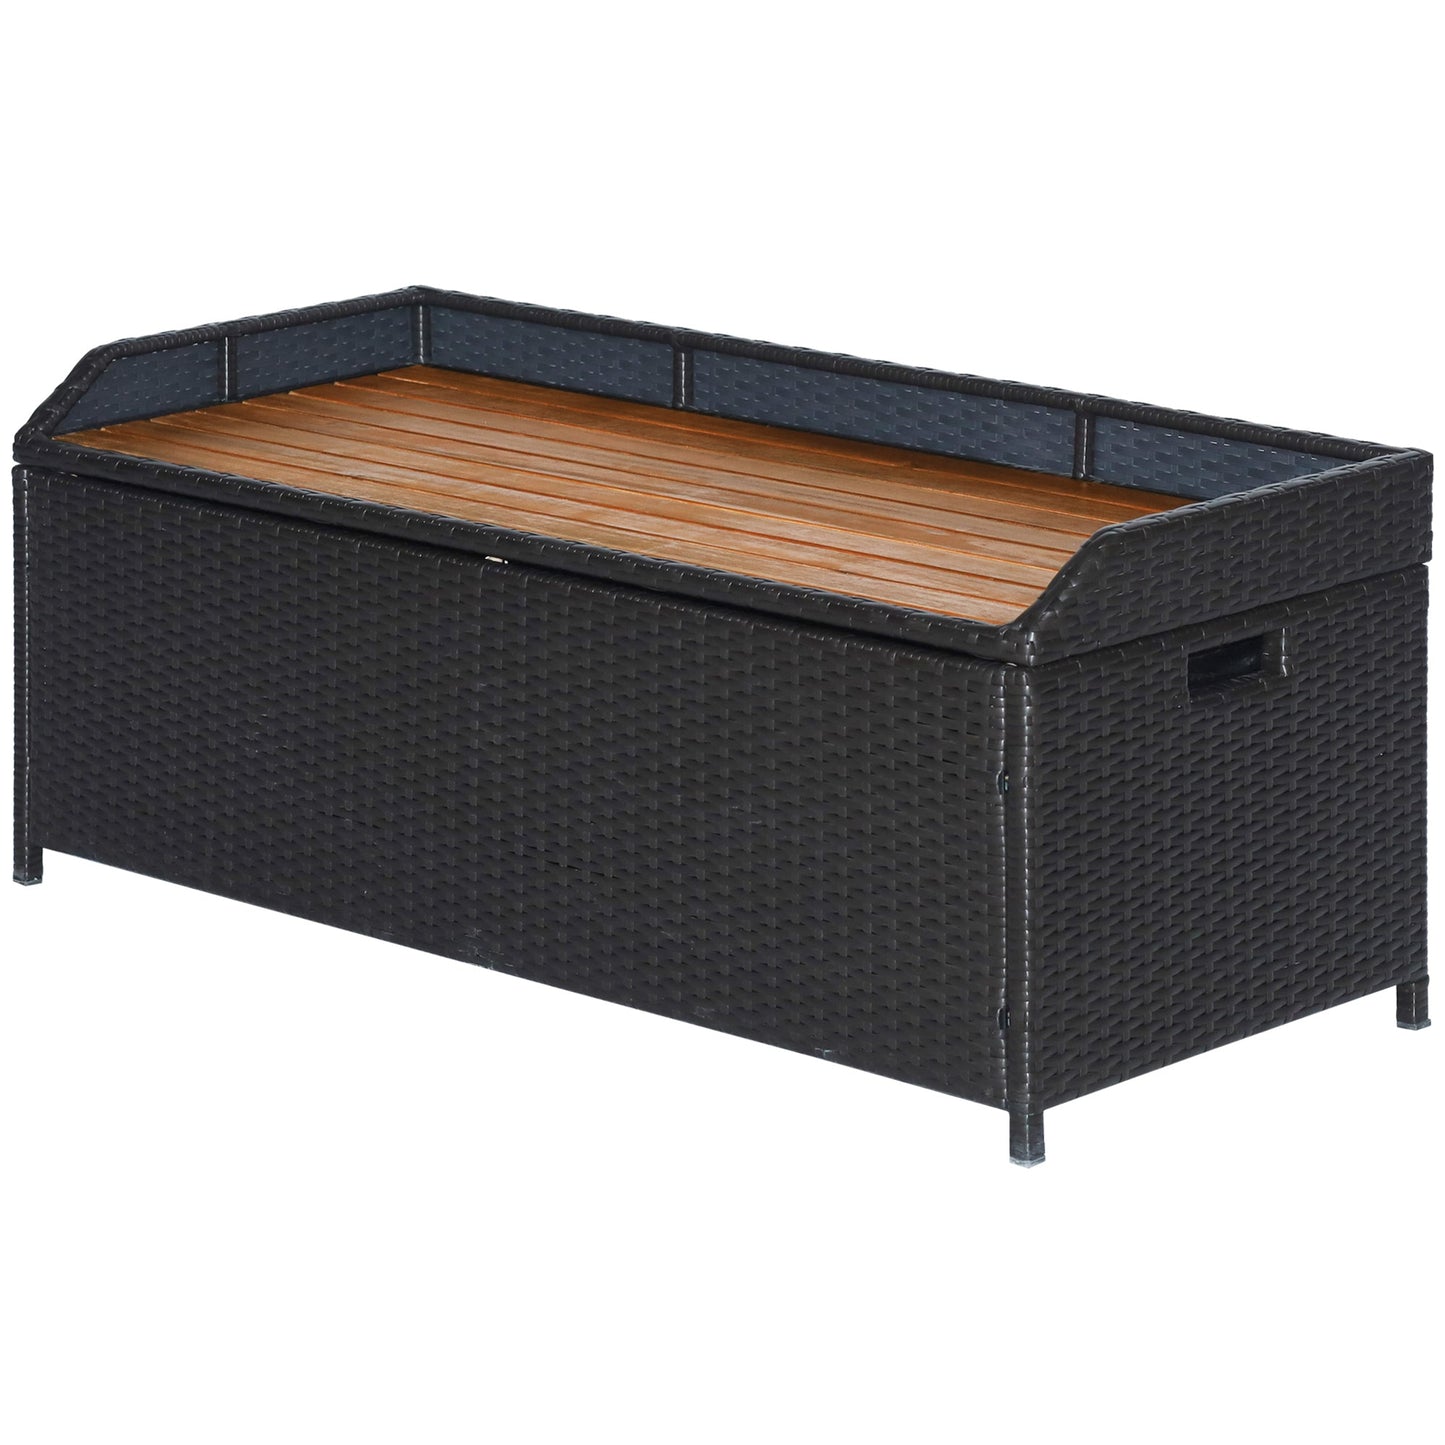 Outdoor and Garden-Outdoor Storage Bench Patio Wicker Furniture with Wooden Seat, Gas Spring, Rattan Container Bin with Lip, Ideal for Storing Tools, Black - Outdoor Style Company